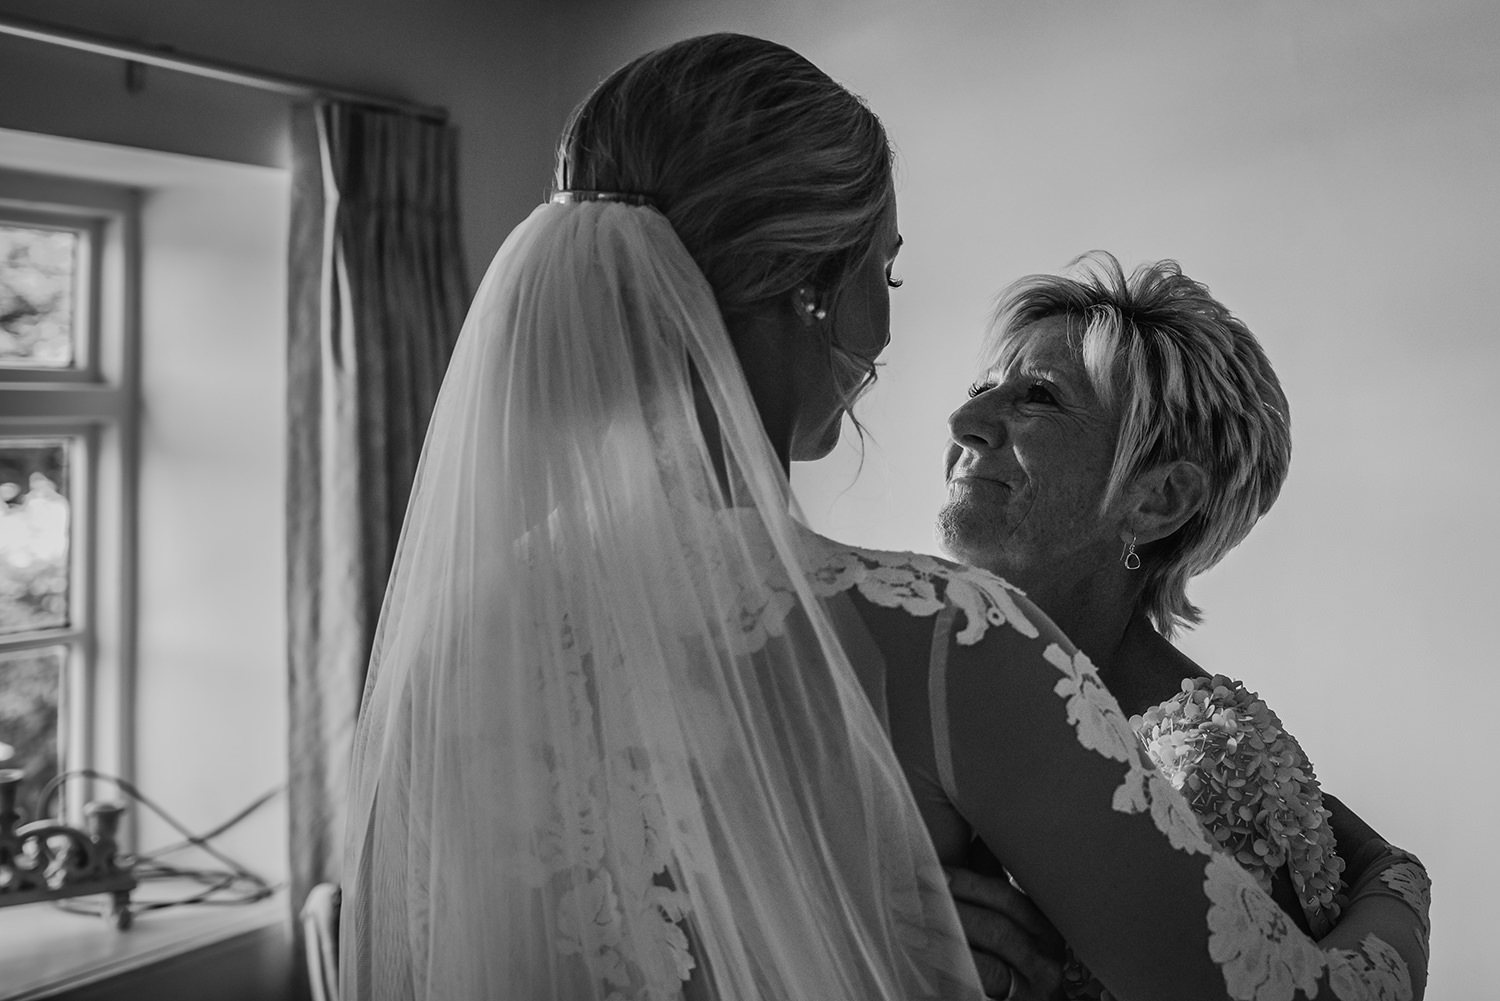  bw photo of bride’s mum hugging bride and looking proud 